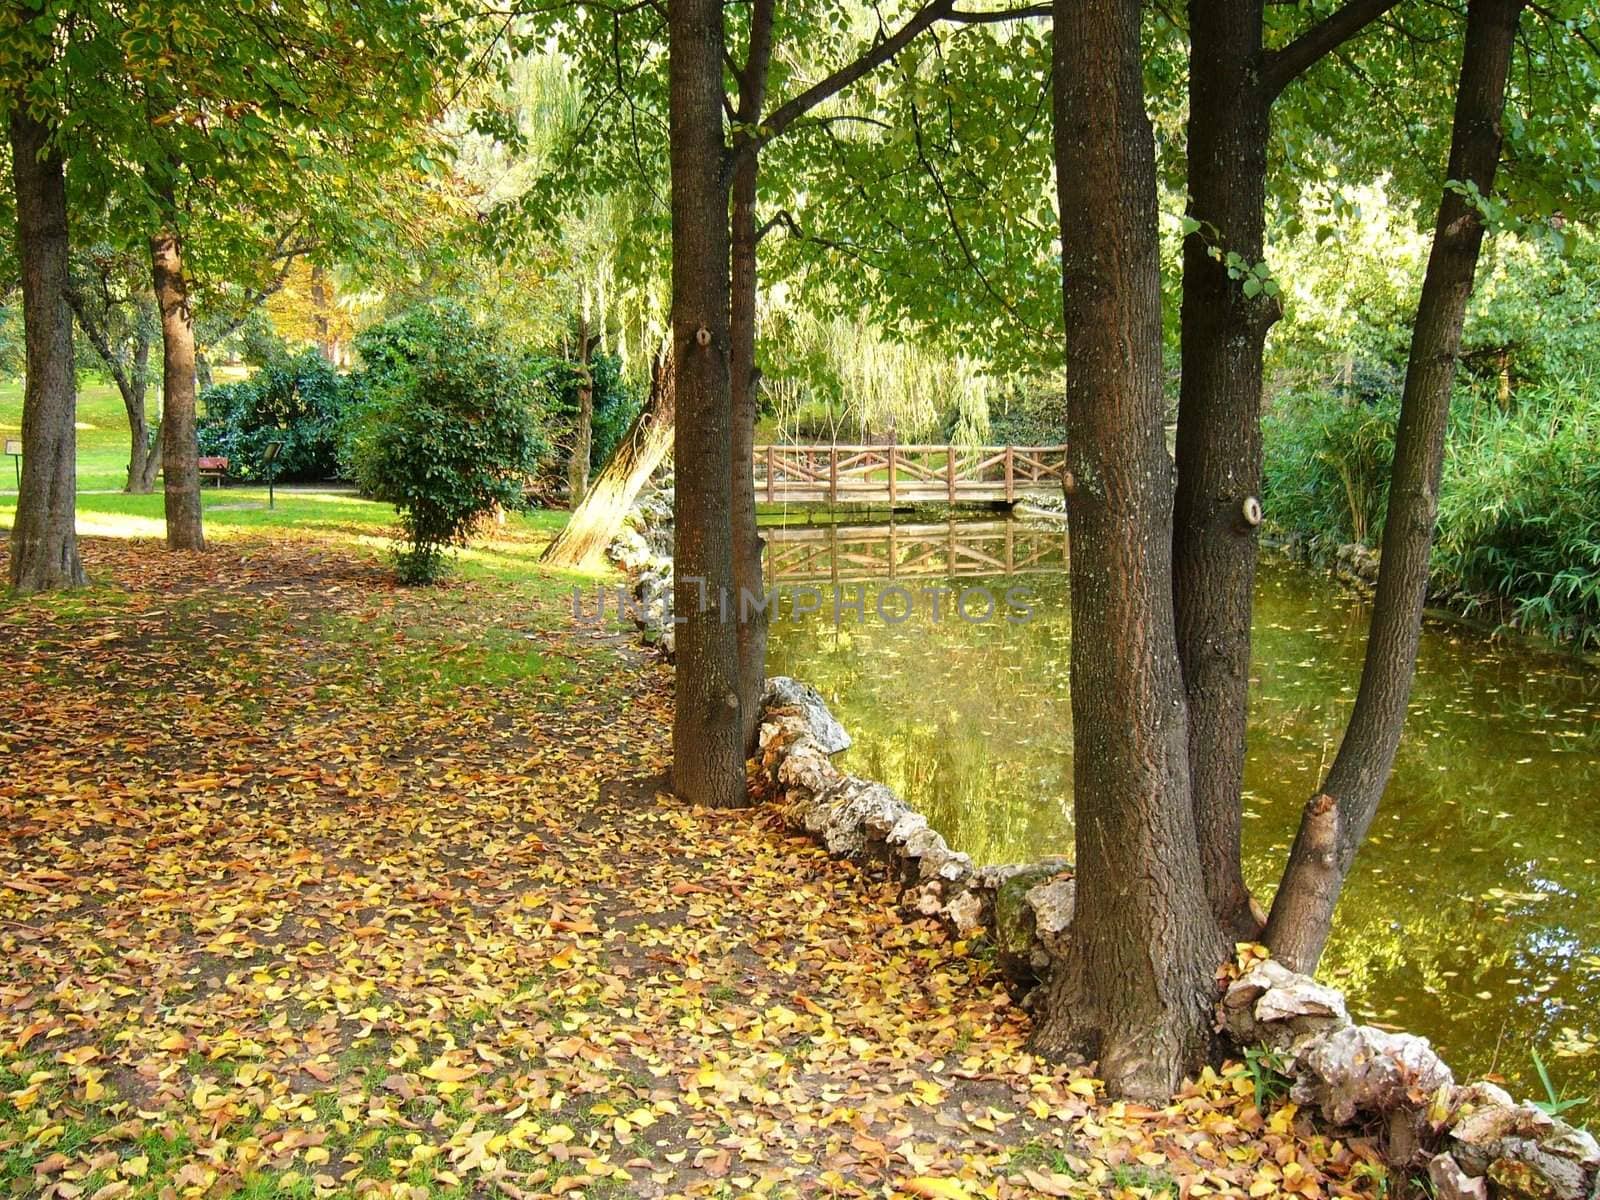 Alley near of pond in the park "Retiro"  of Madrid on autumn day.